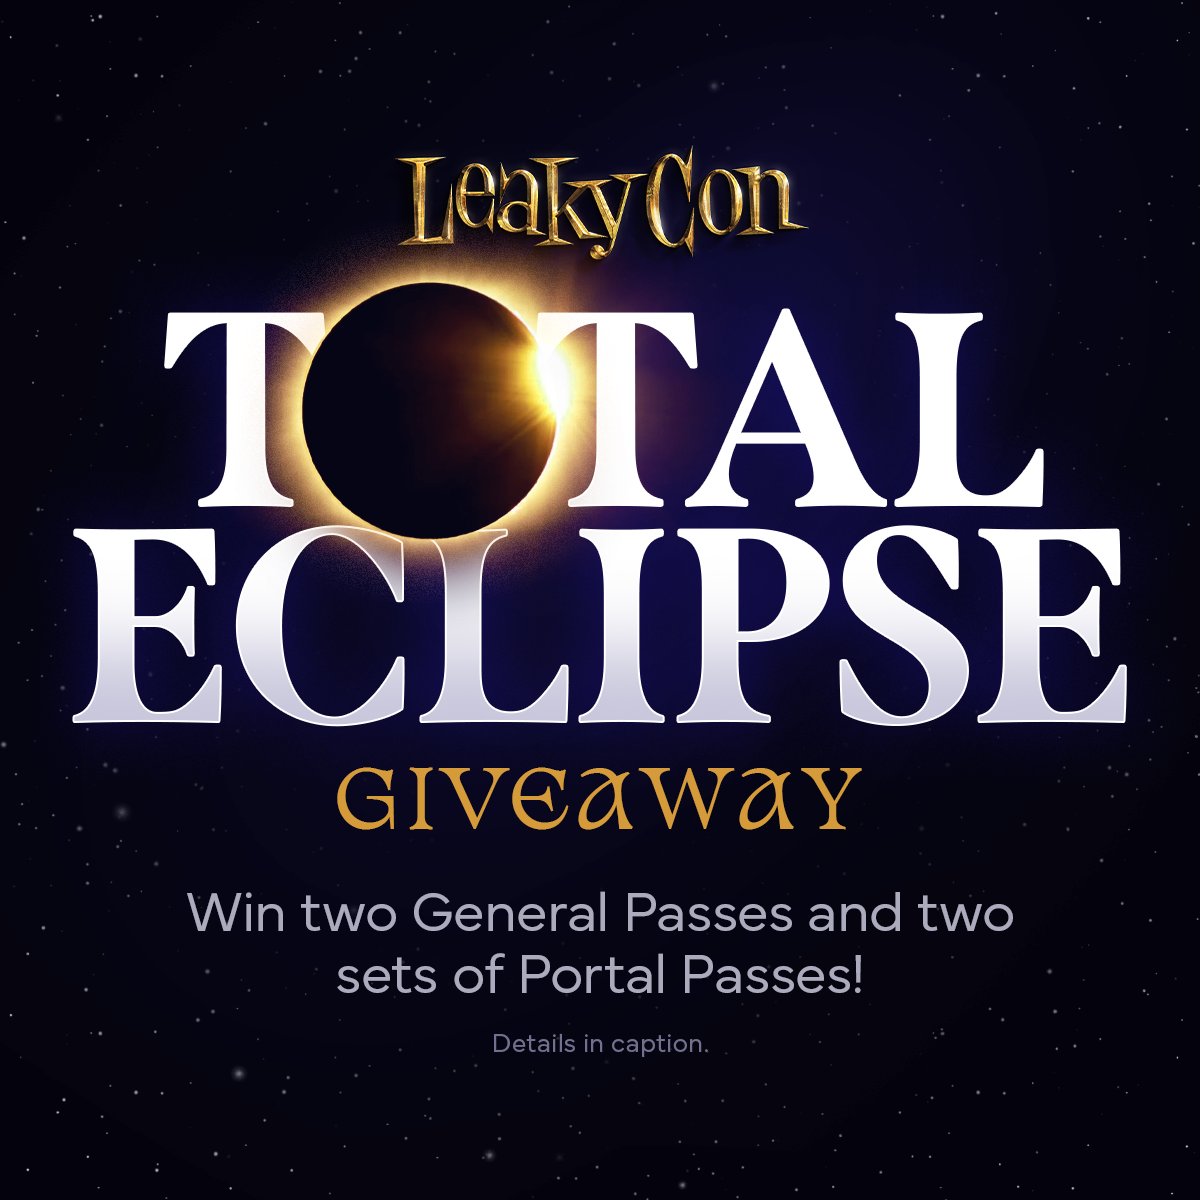 We need your love tonight, don't miss our Total Eclipse Giveaway! Prize includes 2 LeakyCon General Passes and 2 Sets of Portal Passes. 🌑✨ Enter to win at leakycon.com/total-eclipse. Contest closes April 8, 2024 at 11:59 PM ET. Winner will be notified via email April 9, 2024.